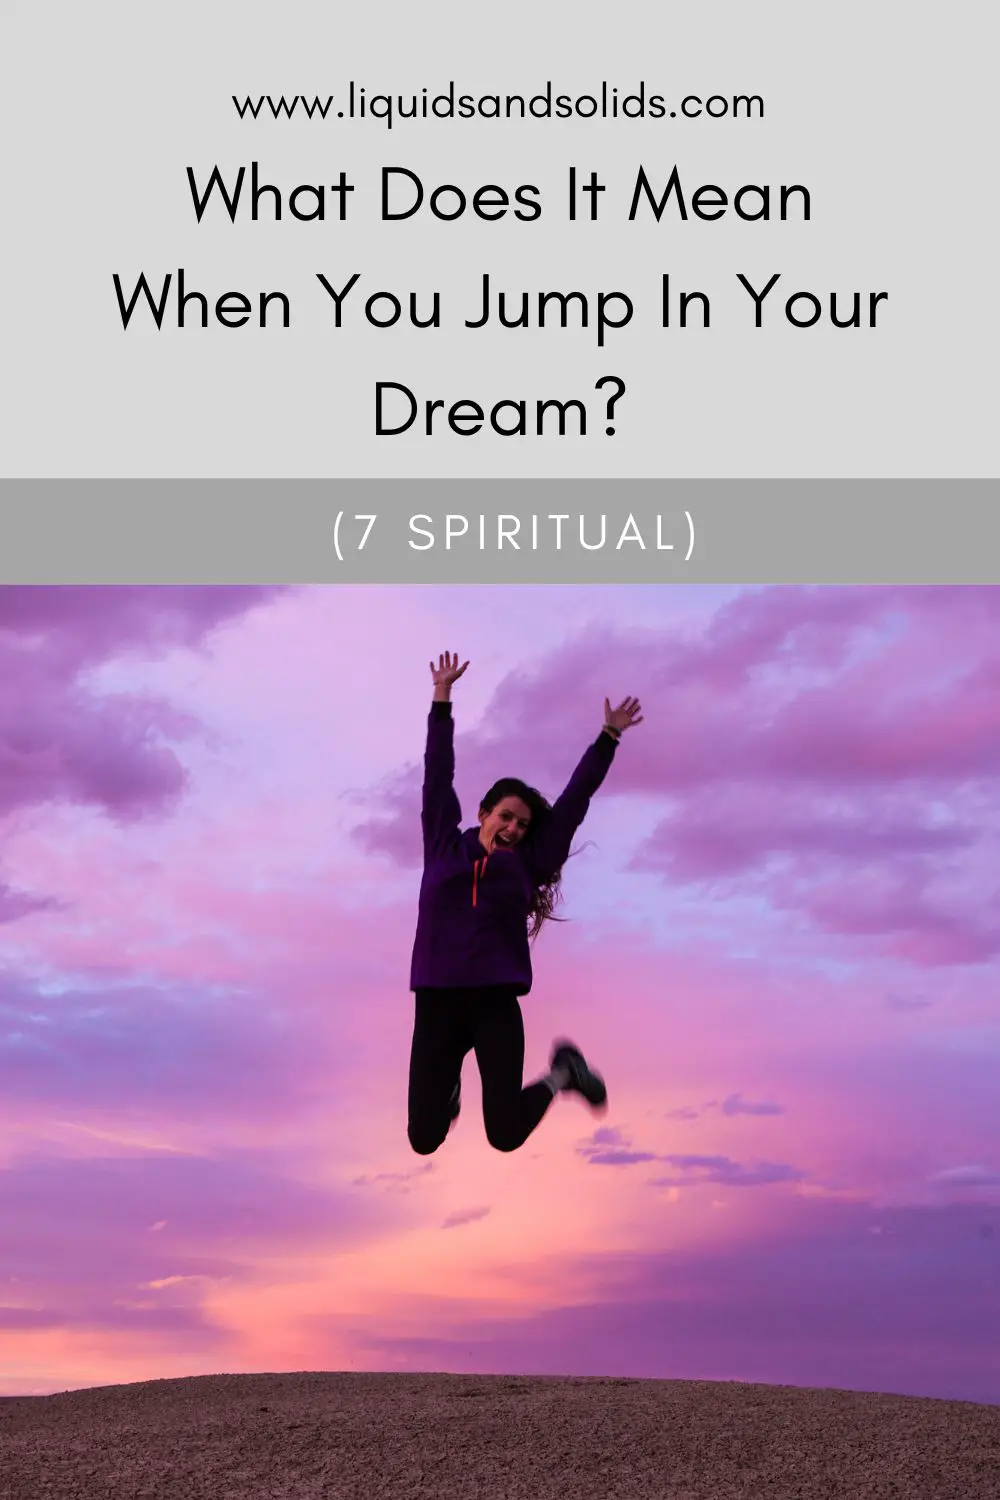 What Is The Spiritual Meaning Of Dreaming Of Jumping Off A Building?